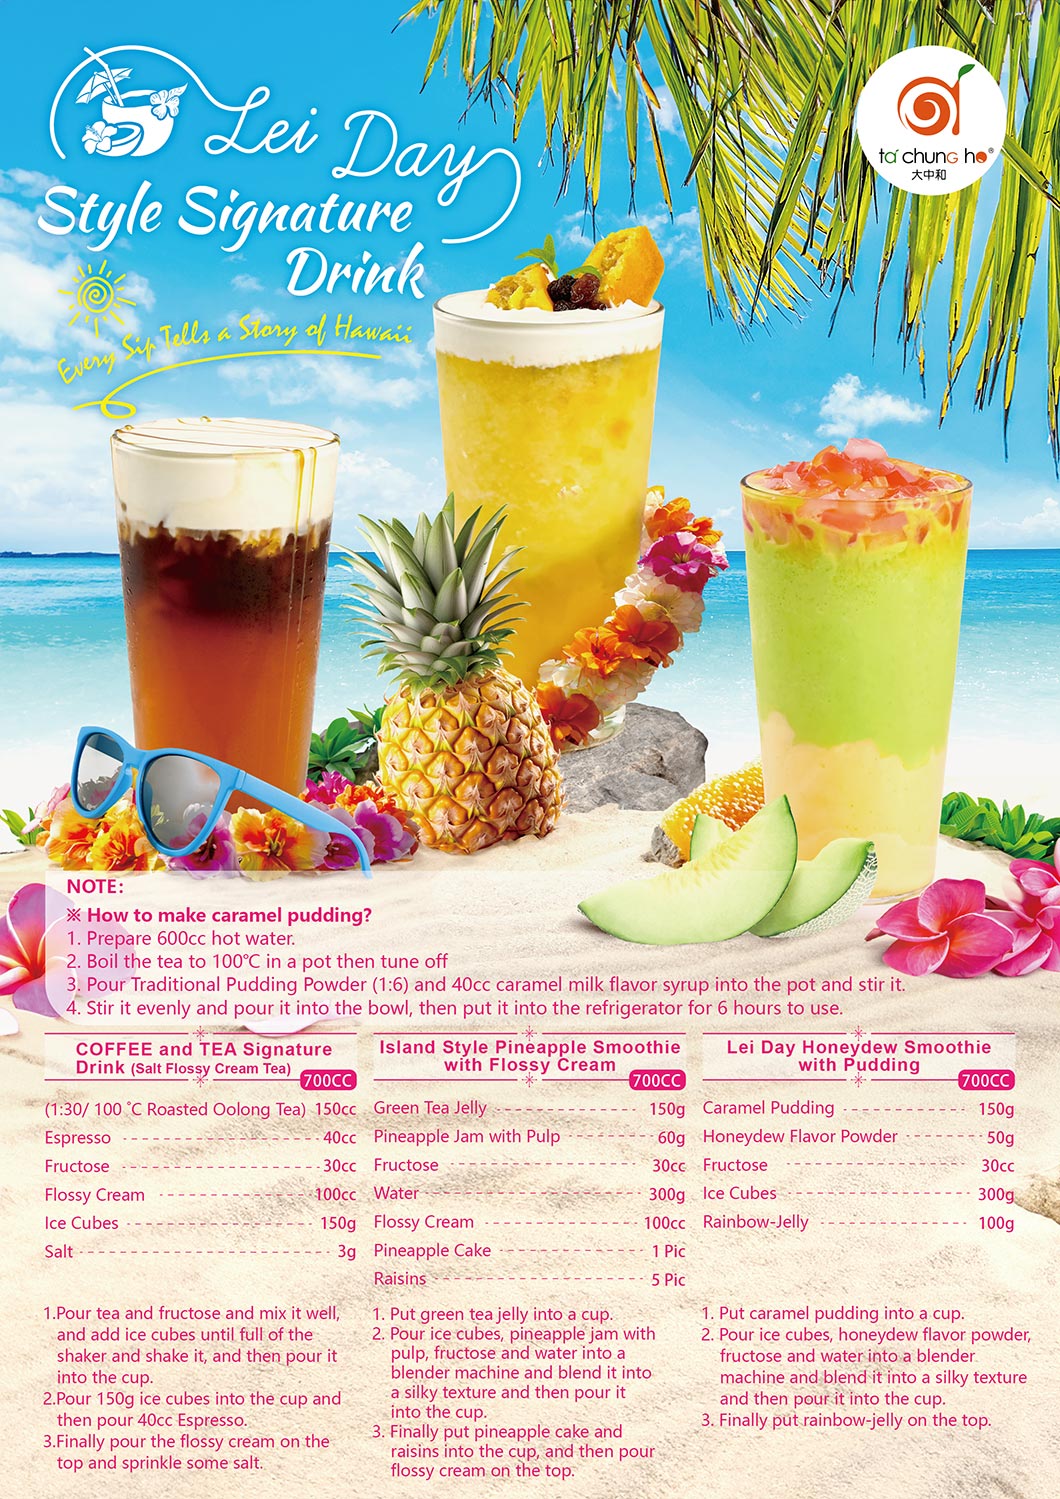 Lei Day Style Signature Drink